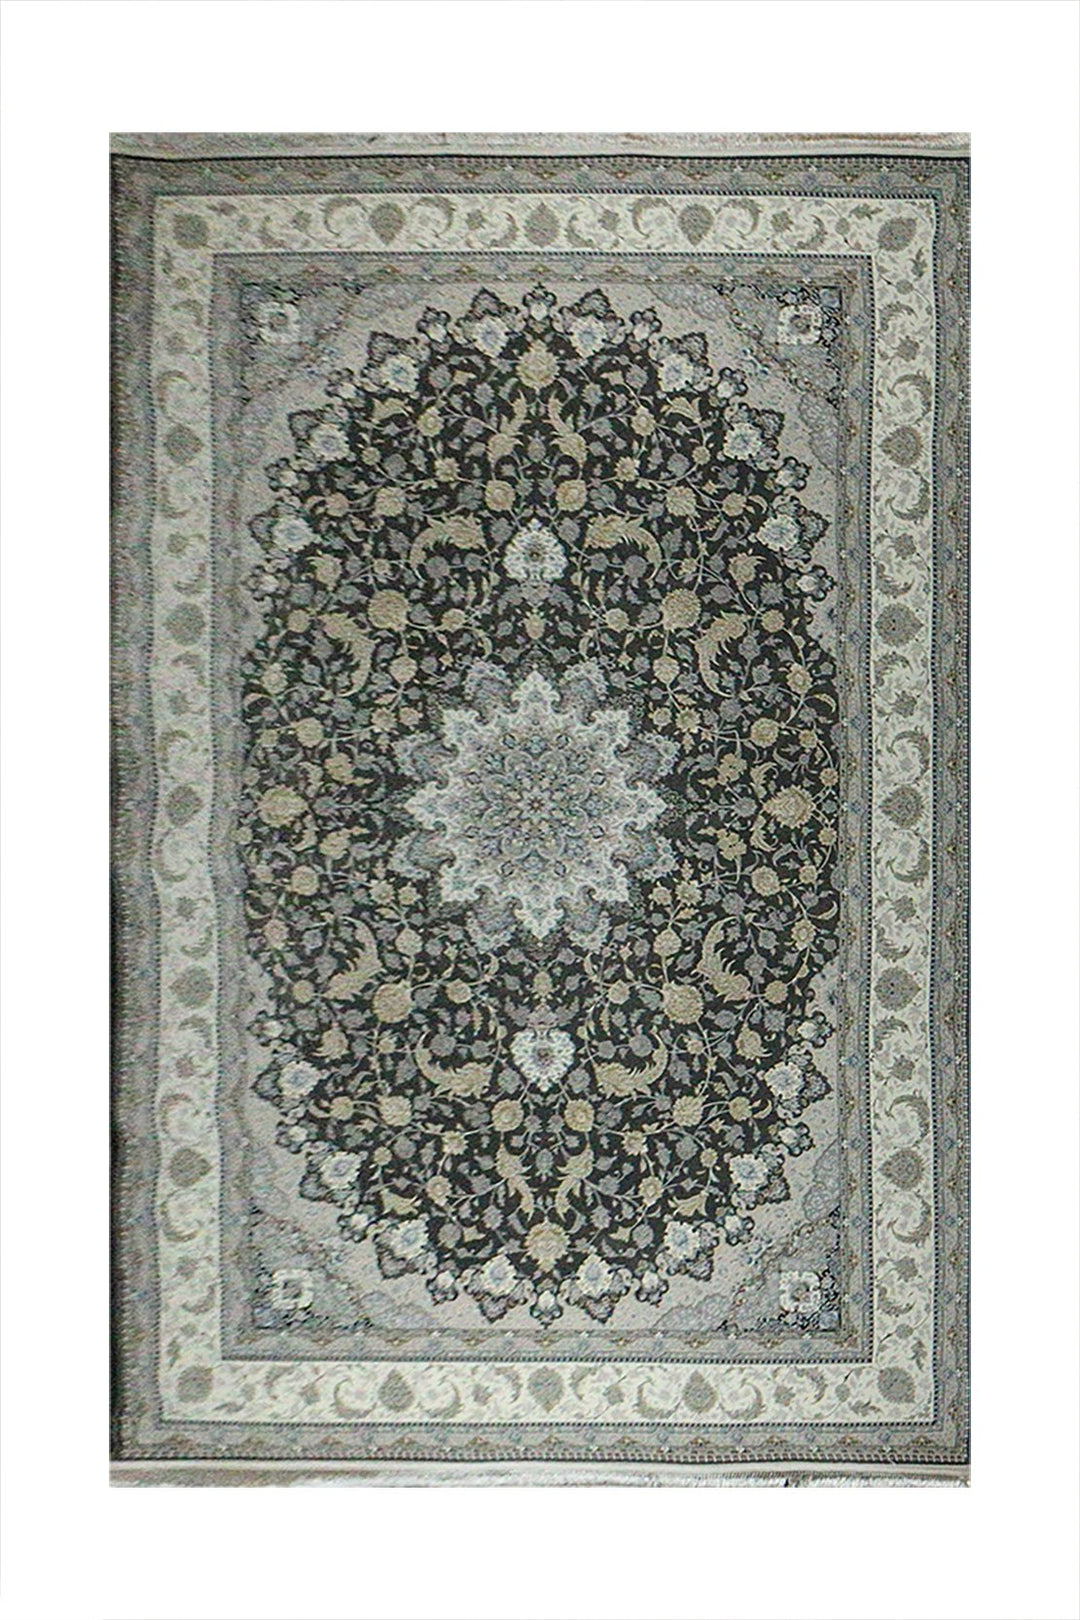 Irani Rug Authentic Persian - 6.5 x 9.8 FT - Gray - Premium Quality Rug - V Surfaces